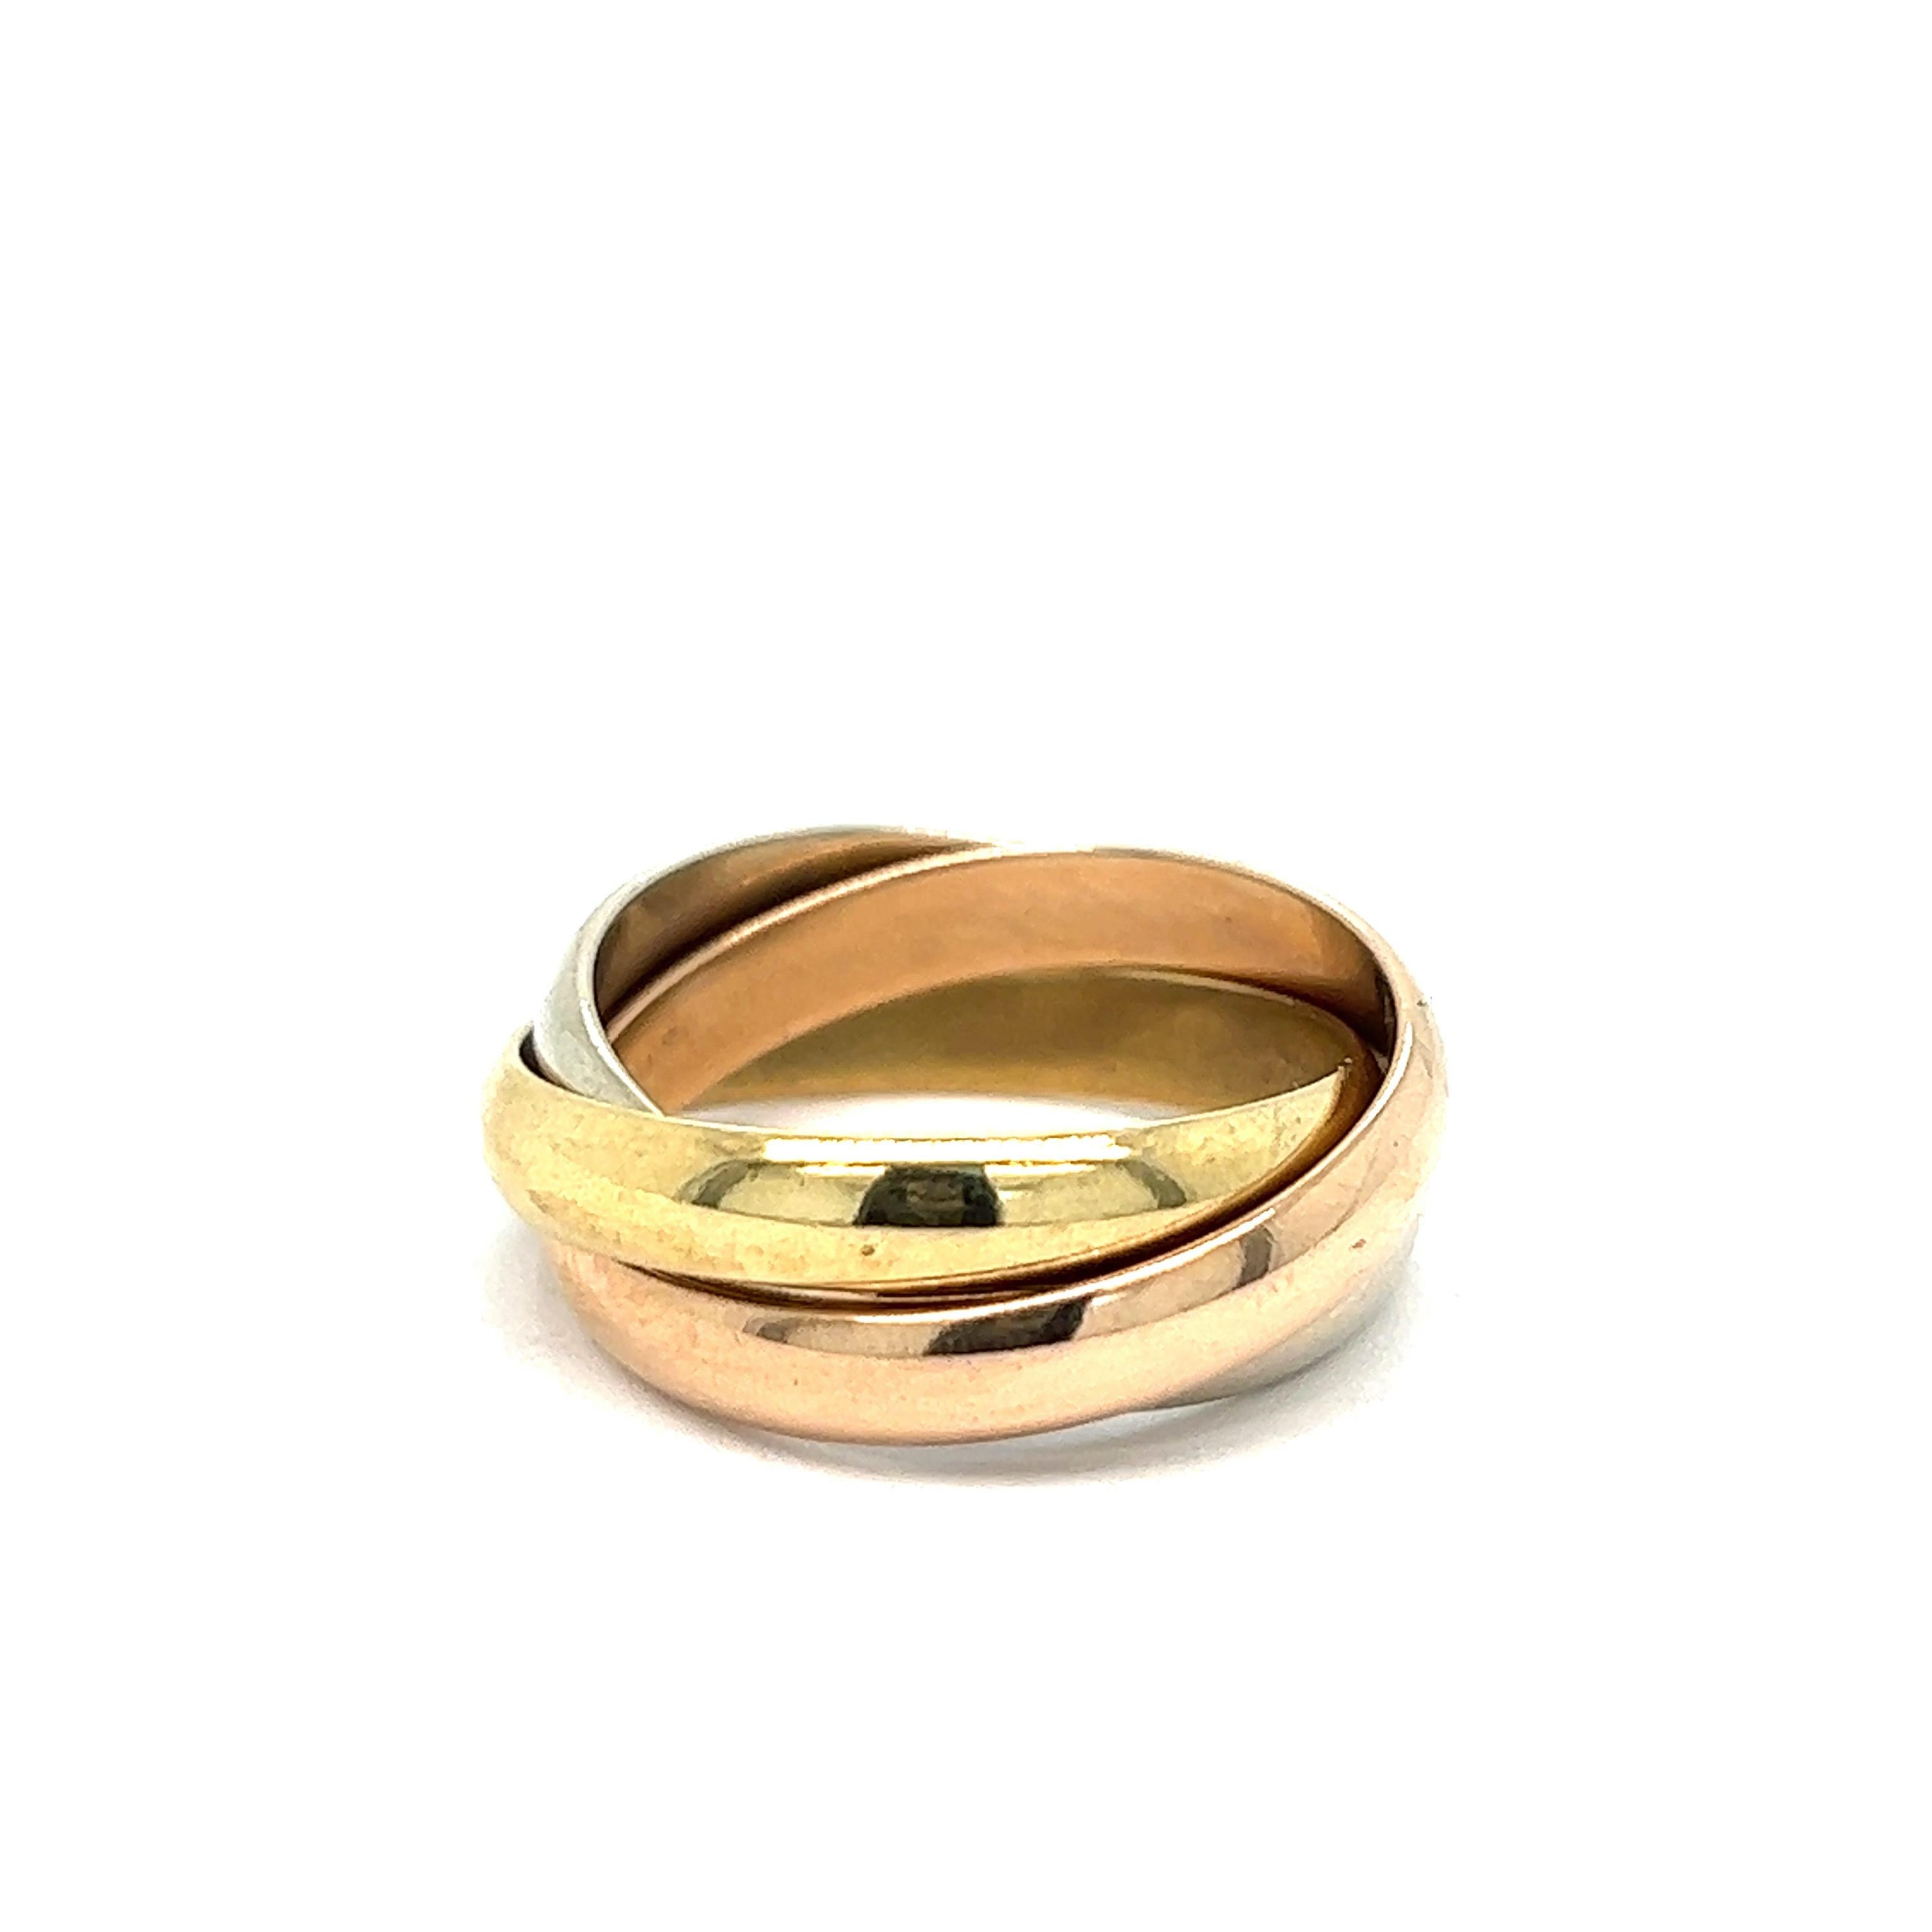 Cartier Les Must de Cartier Gold Rings In Good Condition For Sale In New York, NY